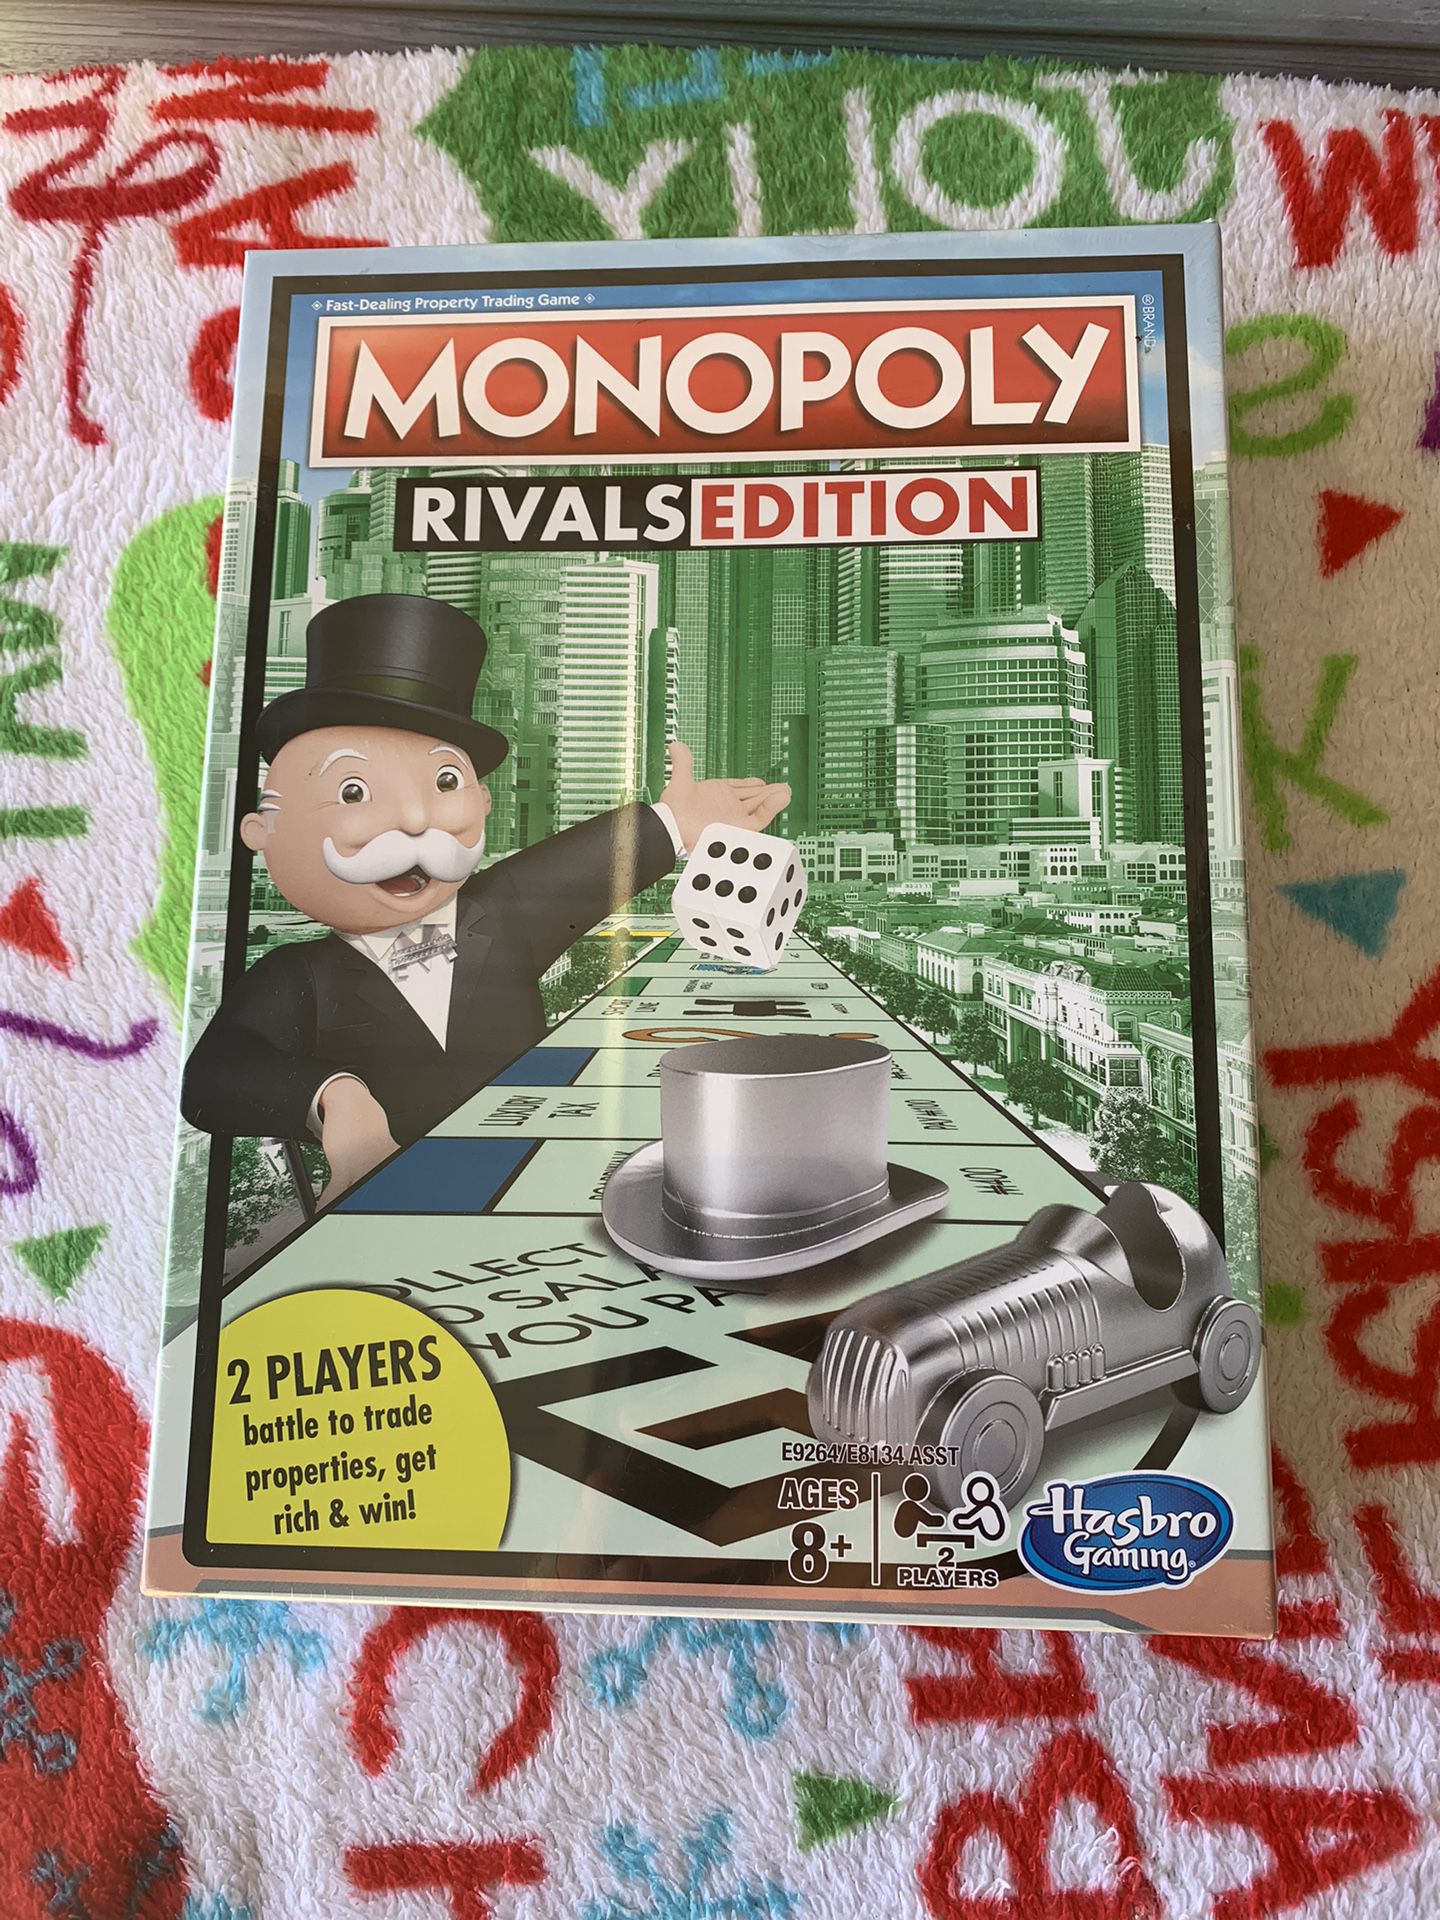 Monopoly rivals edition game board